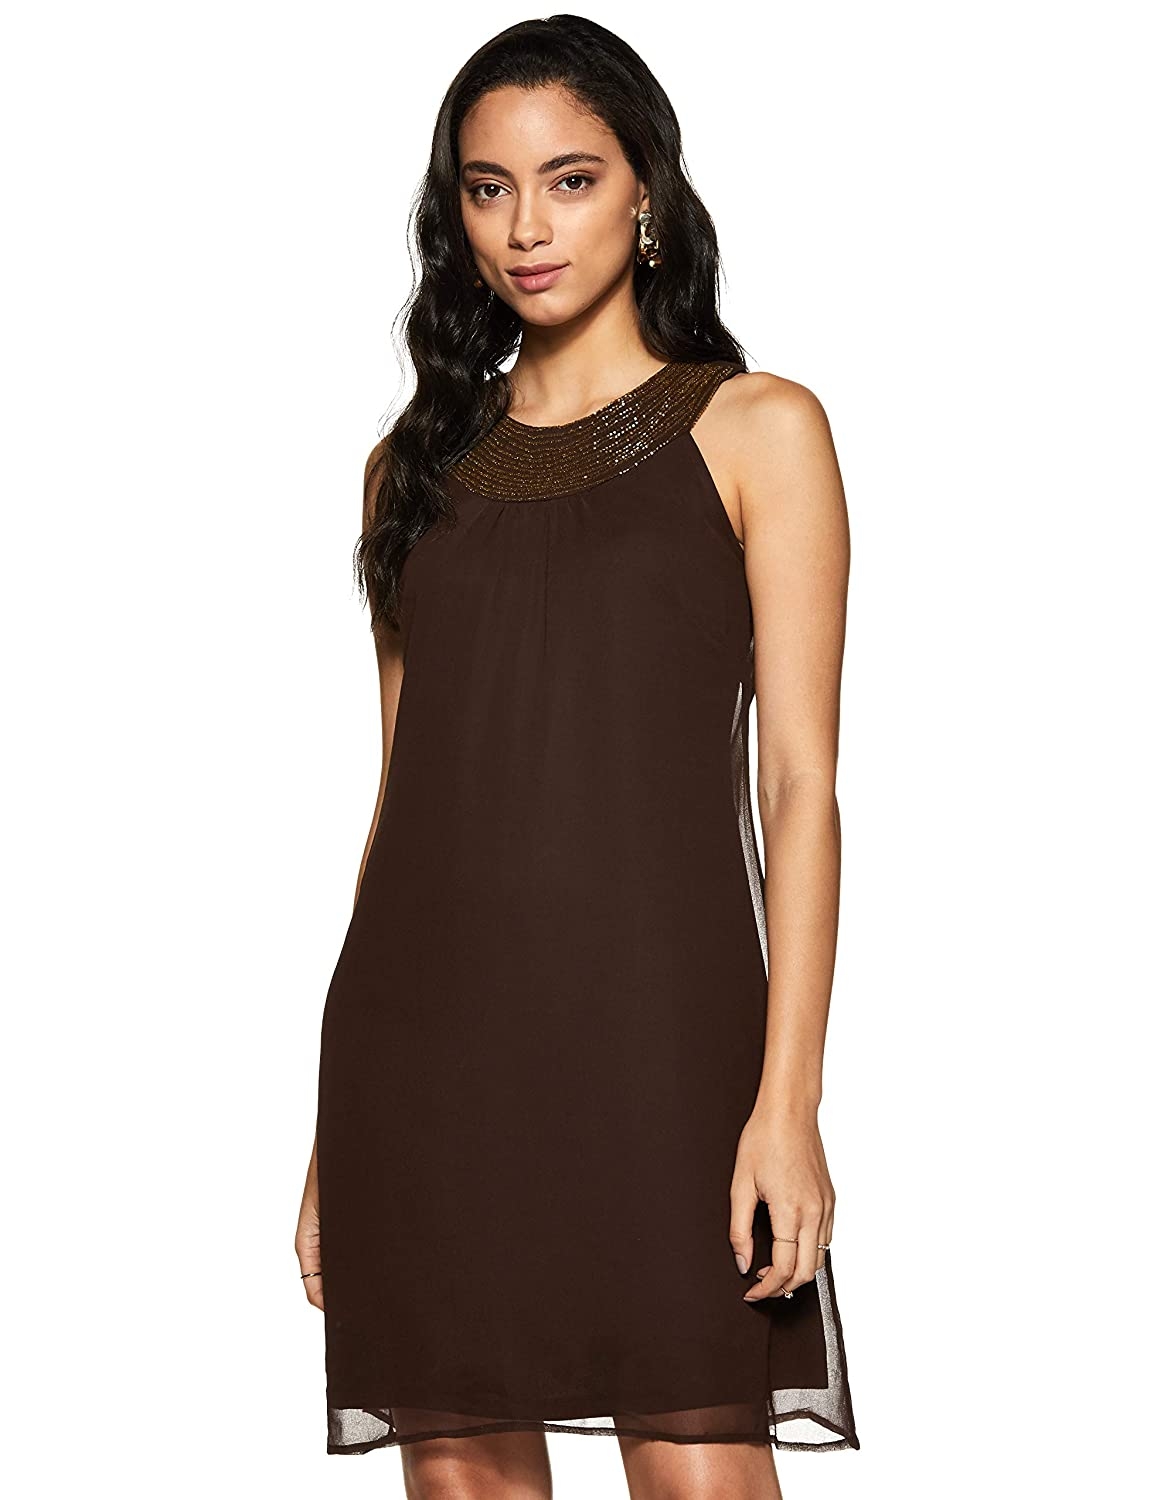 LY2 Brown Polyester Embellished Mini Dress 